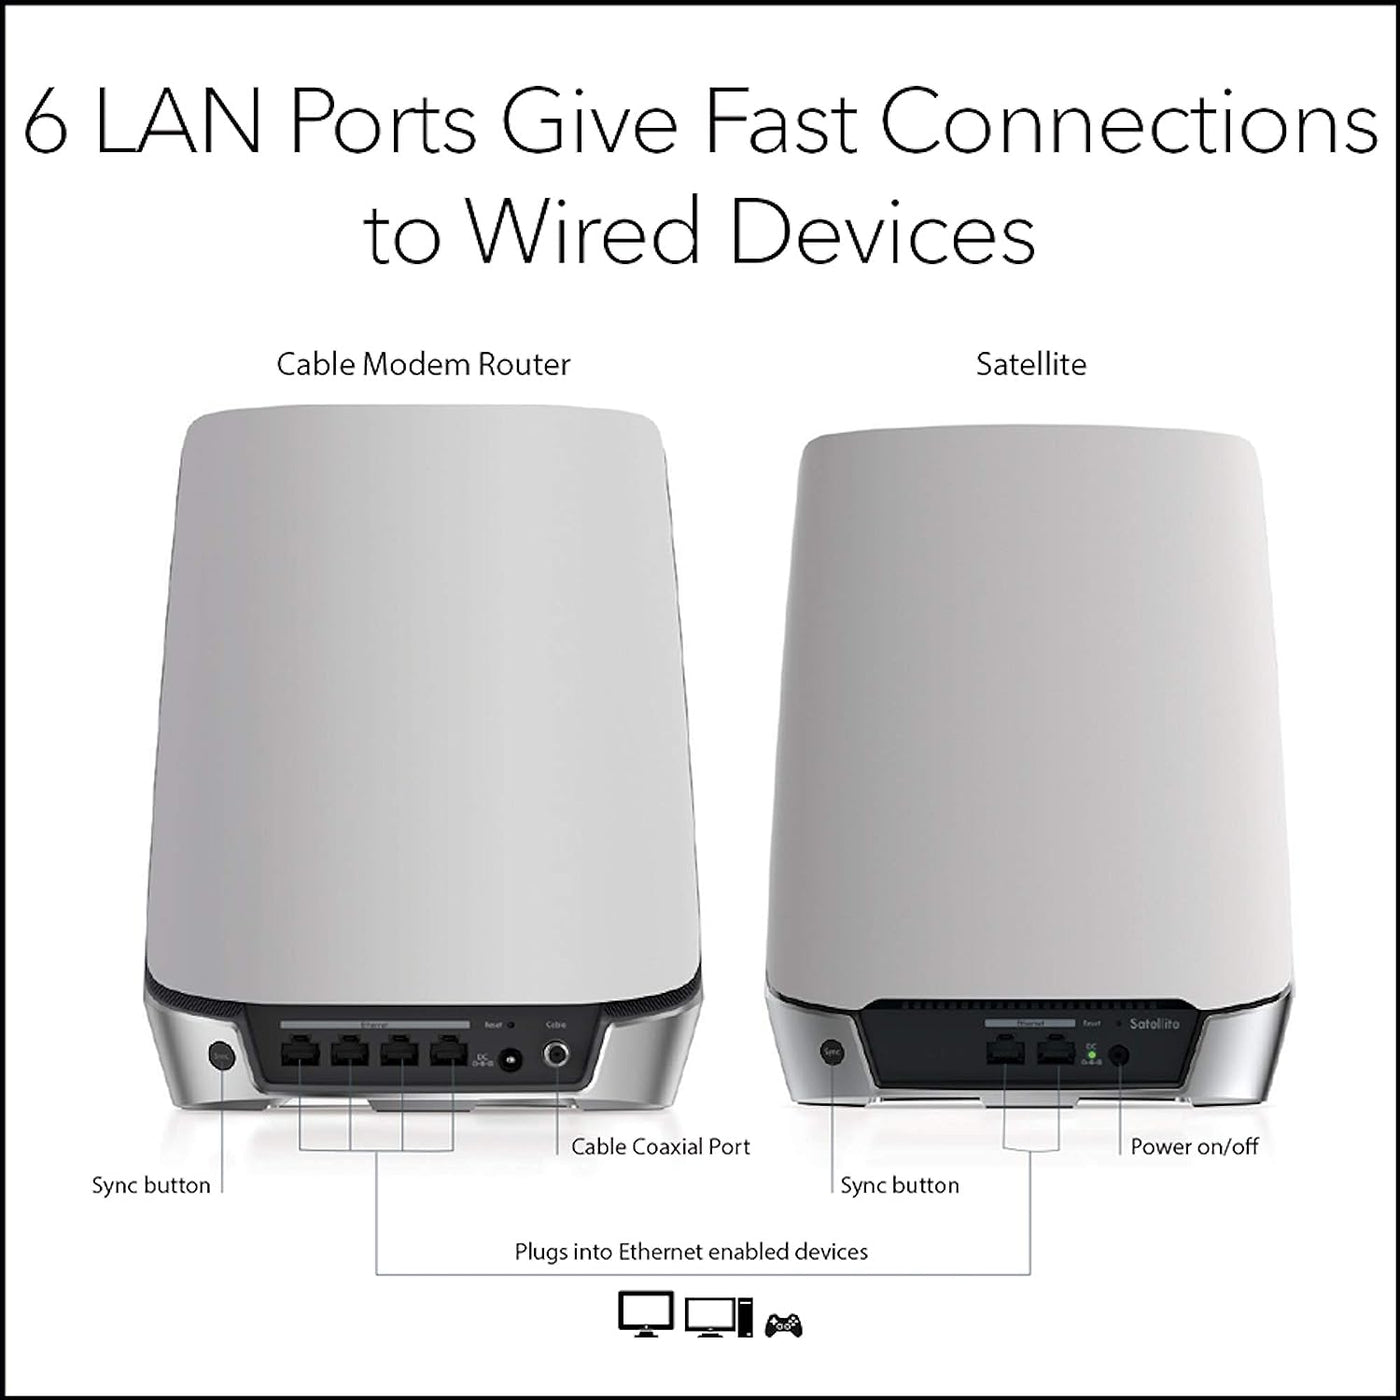 NETGEAR Orbi Whole Home WiFi 6 System with DOCSIS 3.1 Built-in Cable Modem - $200